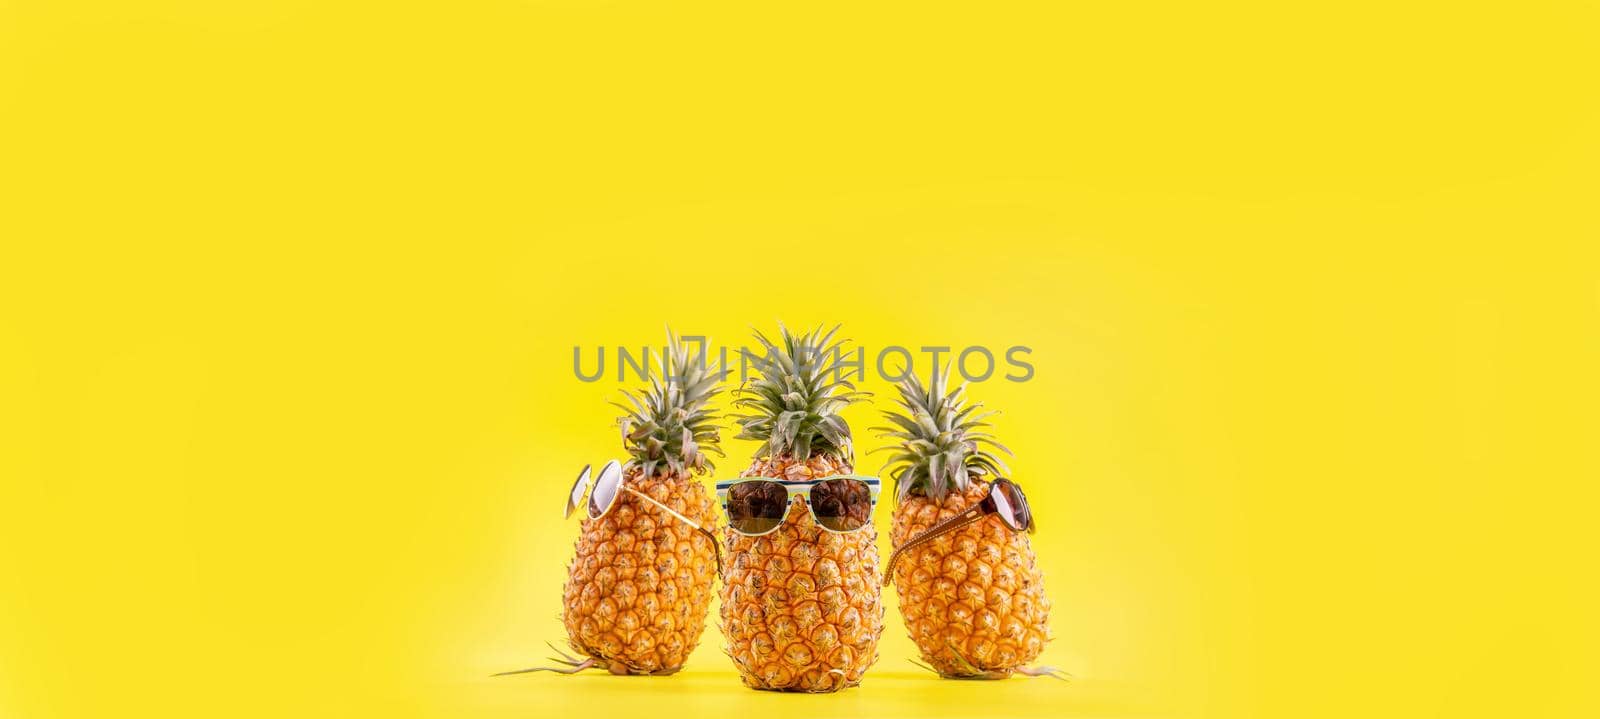 Creative pineapple looking up with sunglasses and shell isolated on yellow background, summer vacation beach idea design pattern, copy space close up